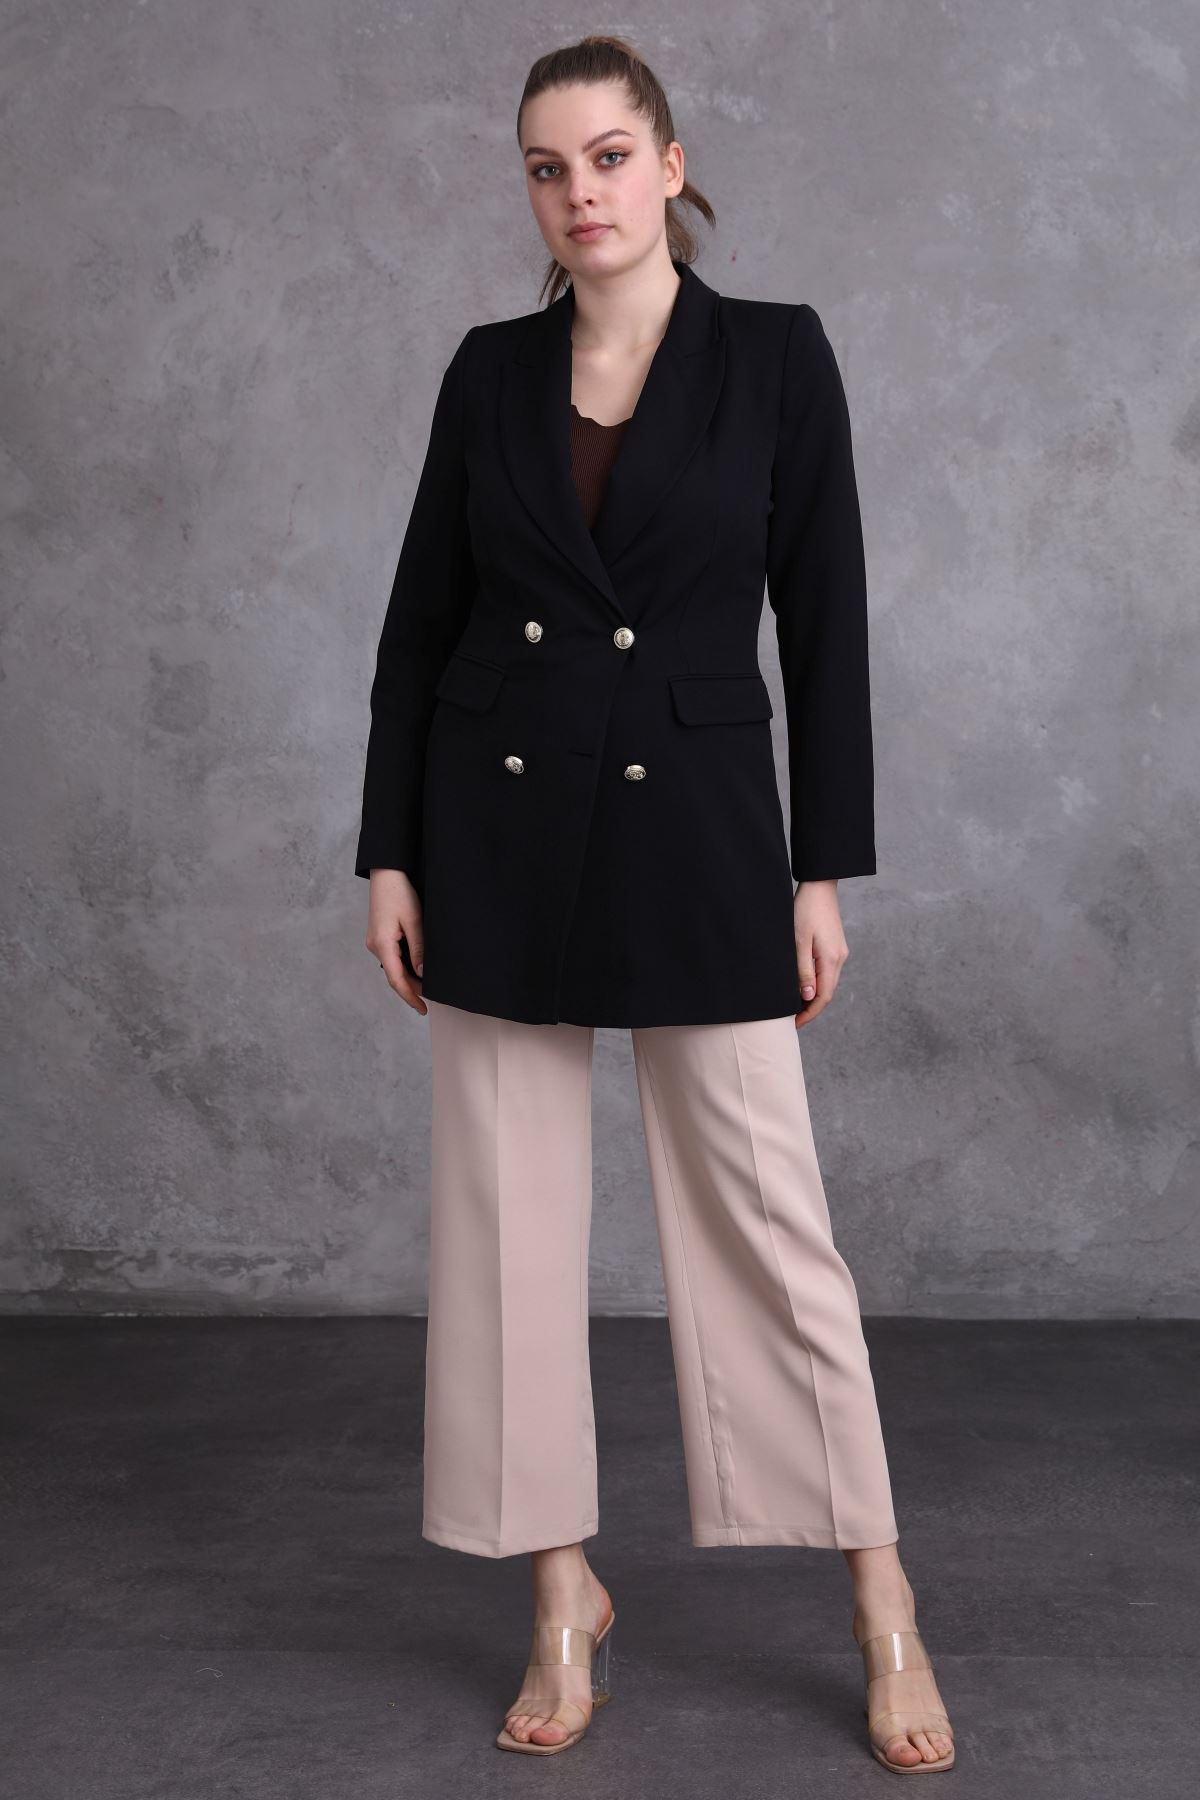 Women's Jacket with Pocket Flap Buttons